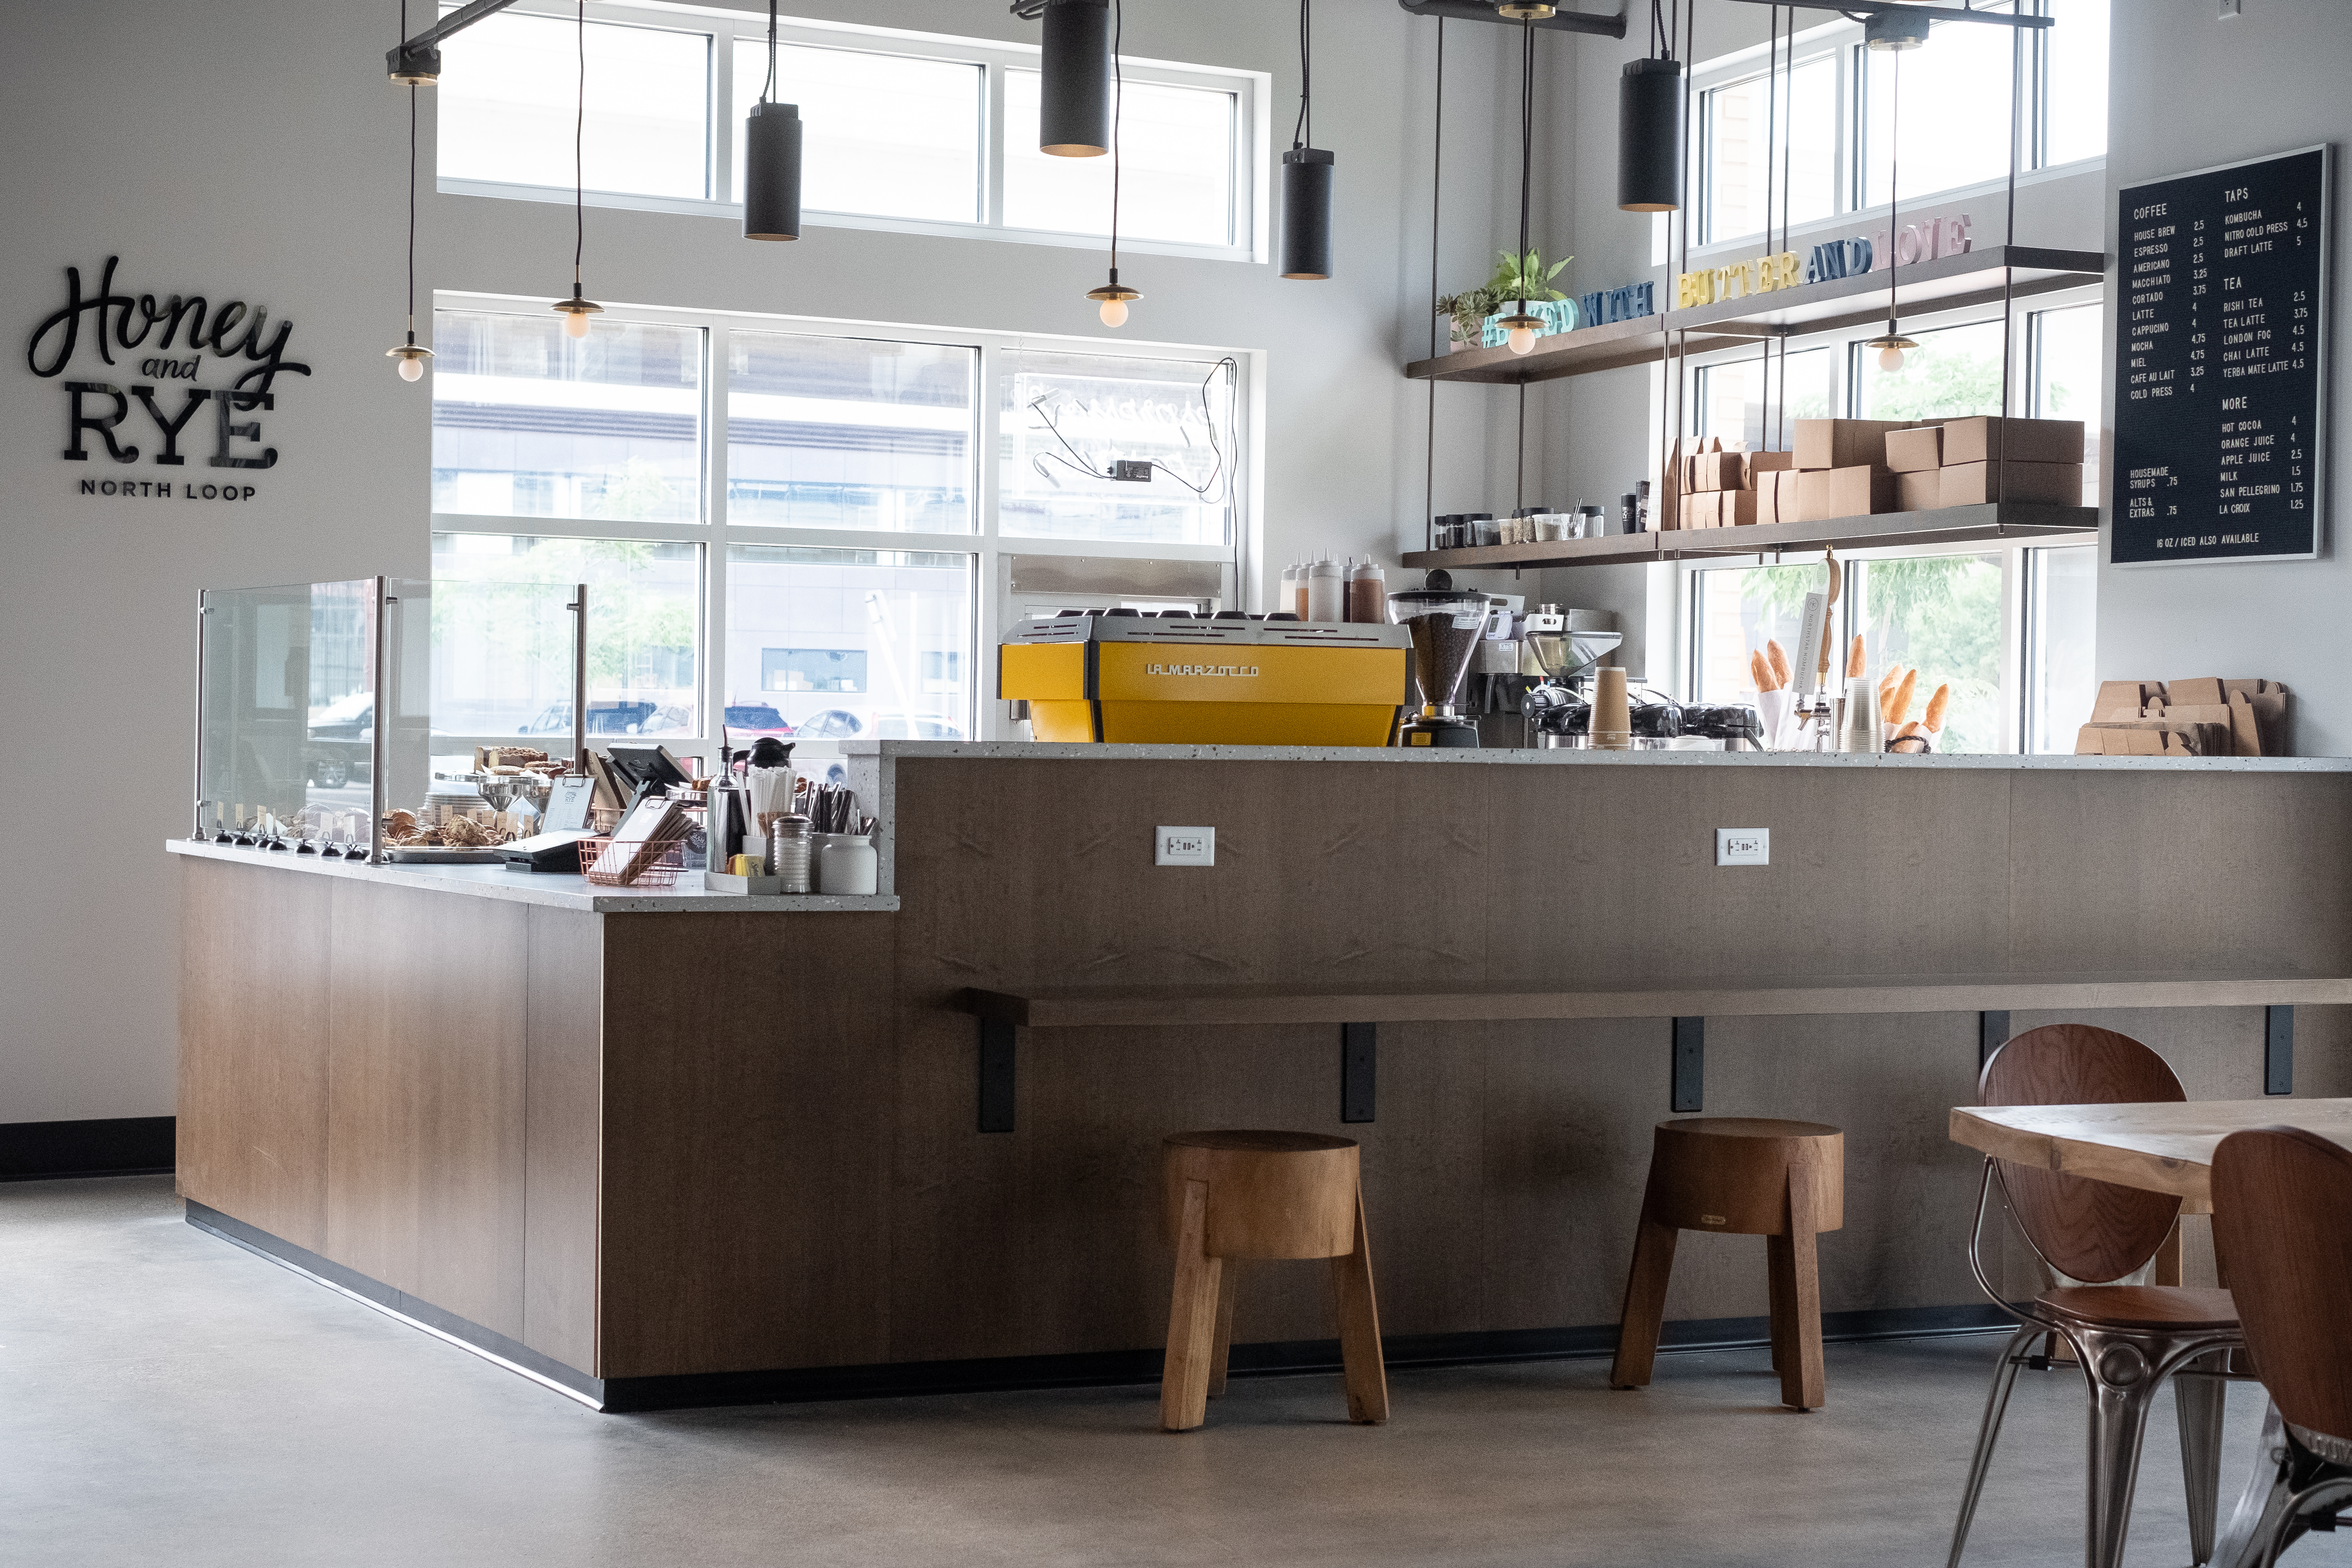 The view of Honey &amp; Rye with a bar alongside it, a counter, and bright yellow espresso machine